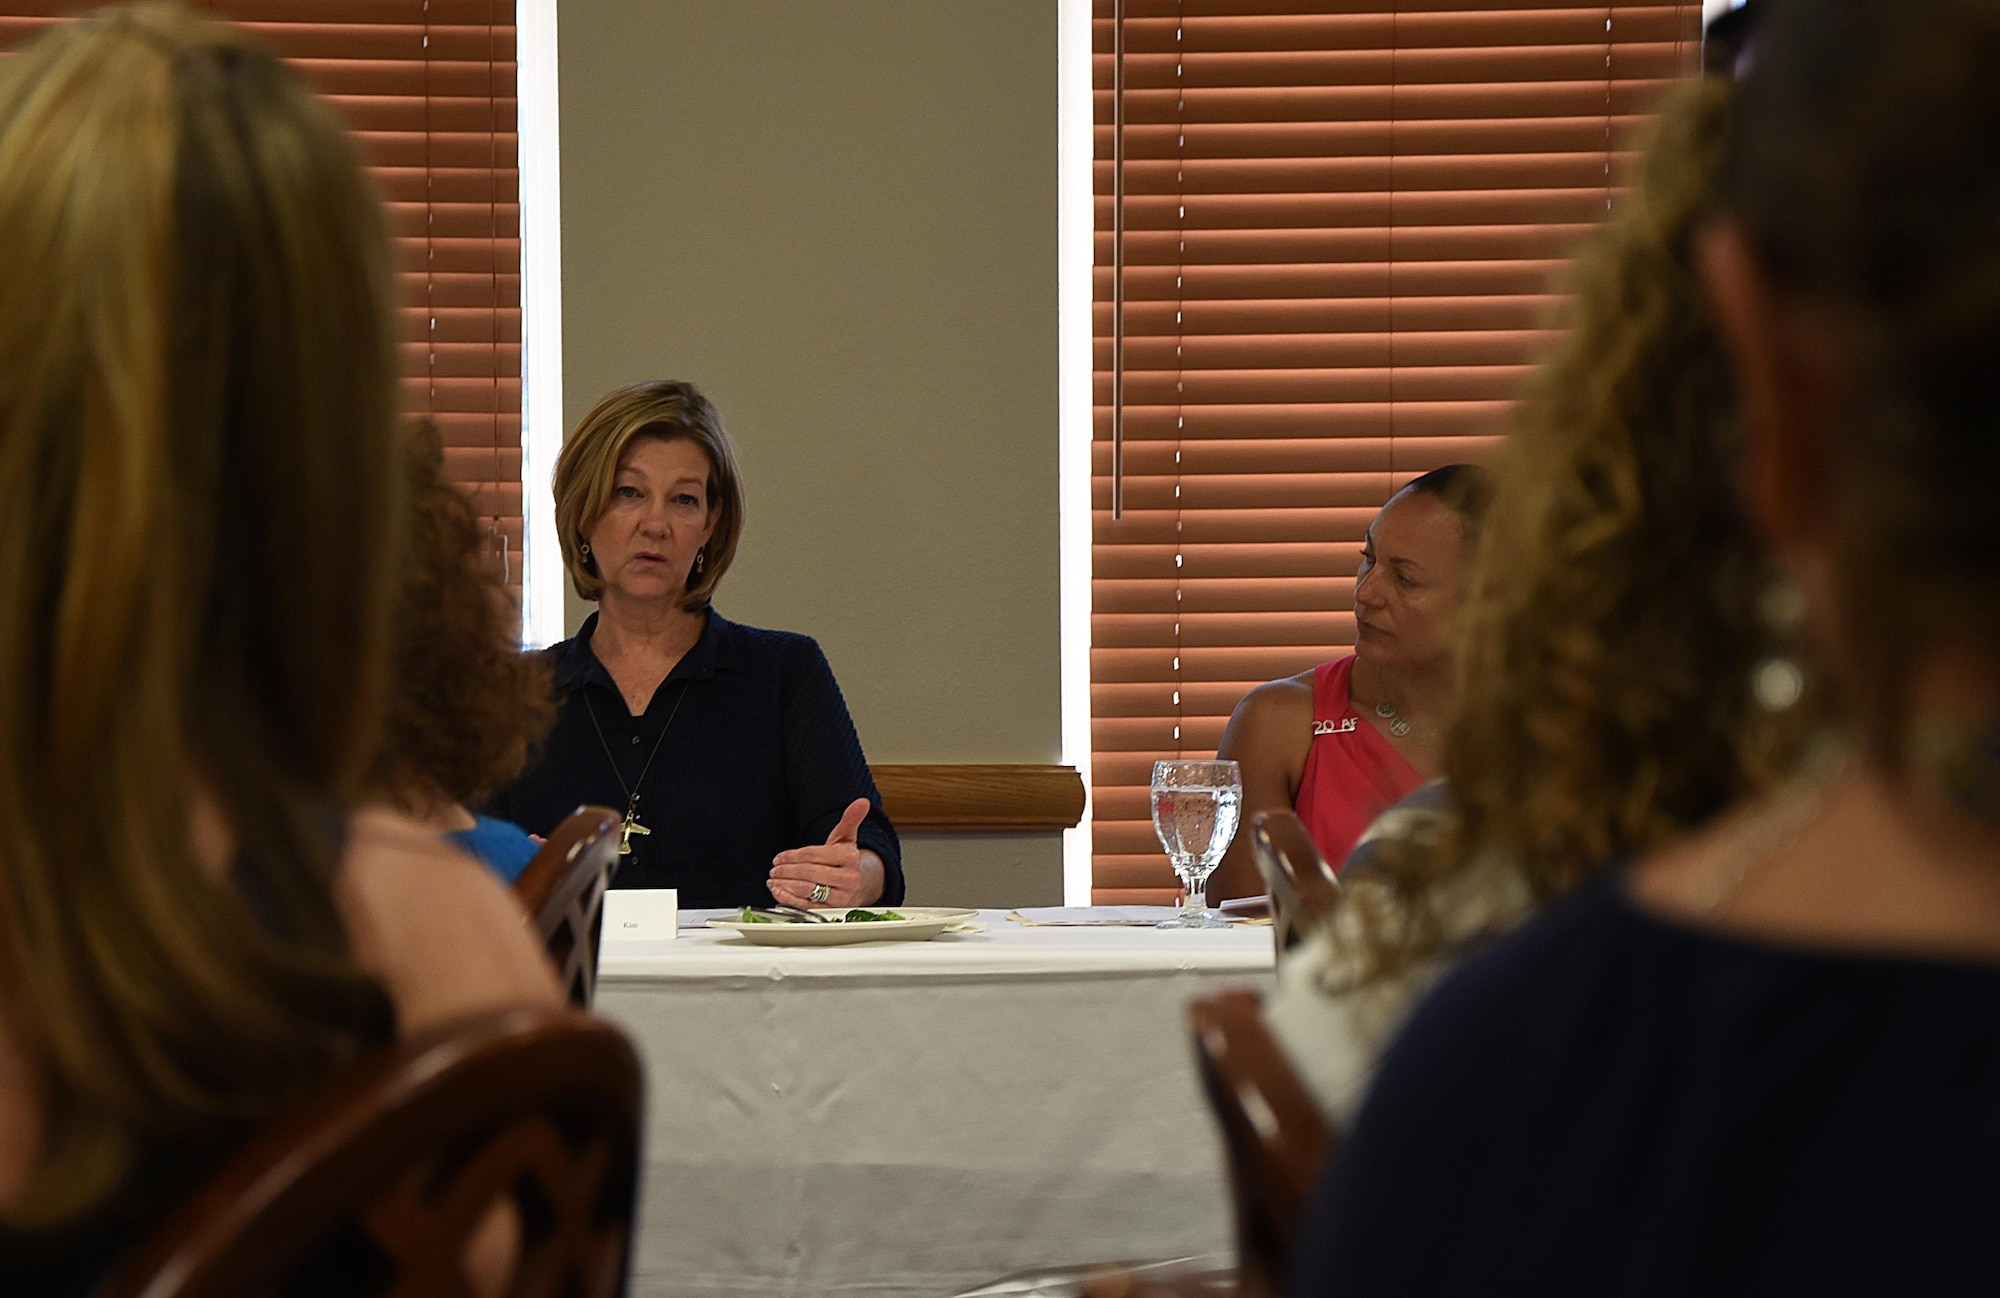 Kim Rand, wife of AFGSC Commander Gen. Robin Rand, talks with 90th Missile Wing key spouses about the importance of the program at Air Force bases July 22, 2016, during a luncheon on F.E. Warren Air Force Base, Wyo. Rand expressed a gratitude towards those who volunteer to help make their squadrons and groups a better place for new spouses. (U.S. Air Force photo by Senior Airman Brandon Valle)